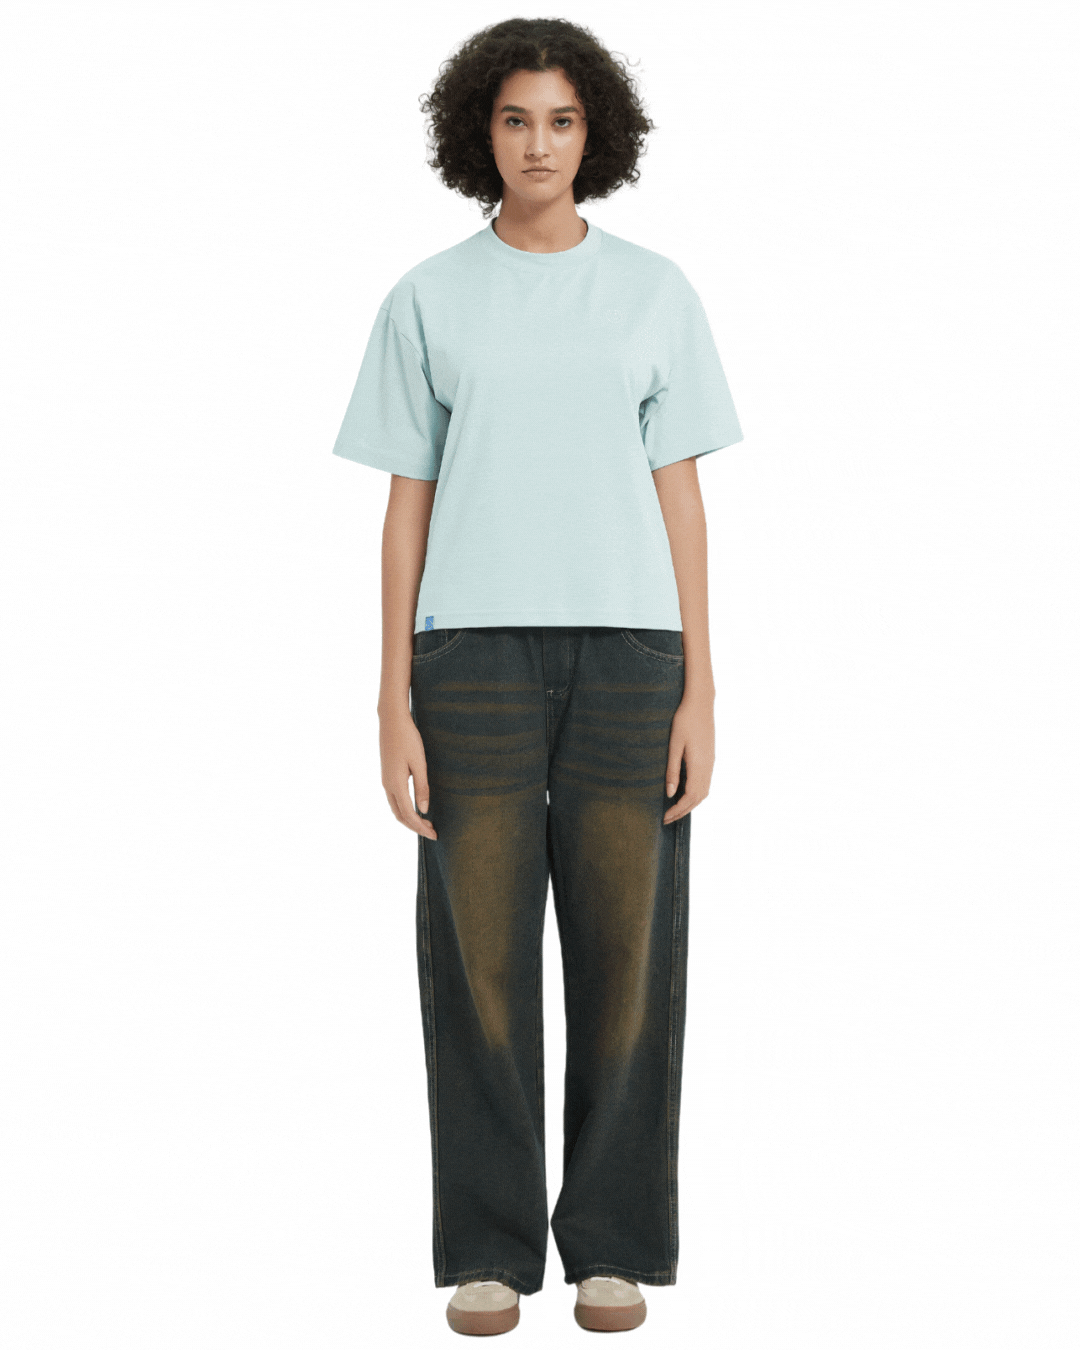 Signature Sunscreen Sorona® Cooling Tee in Minty Blue